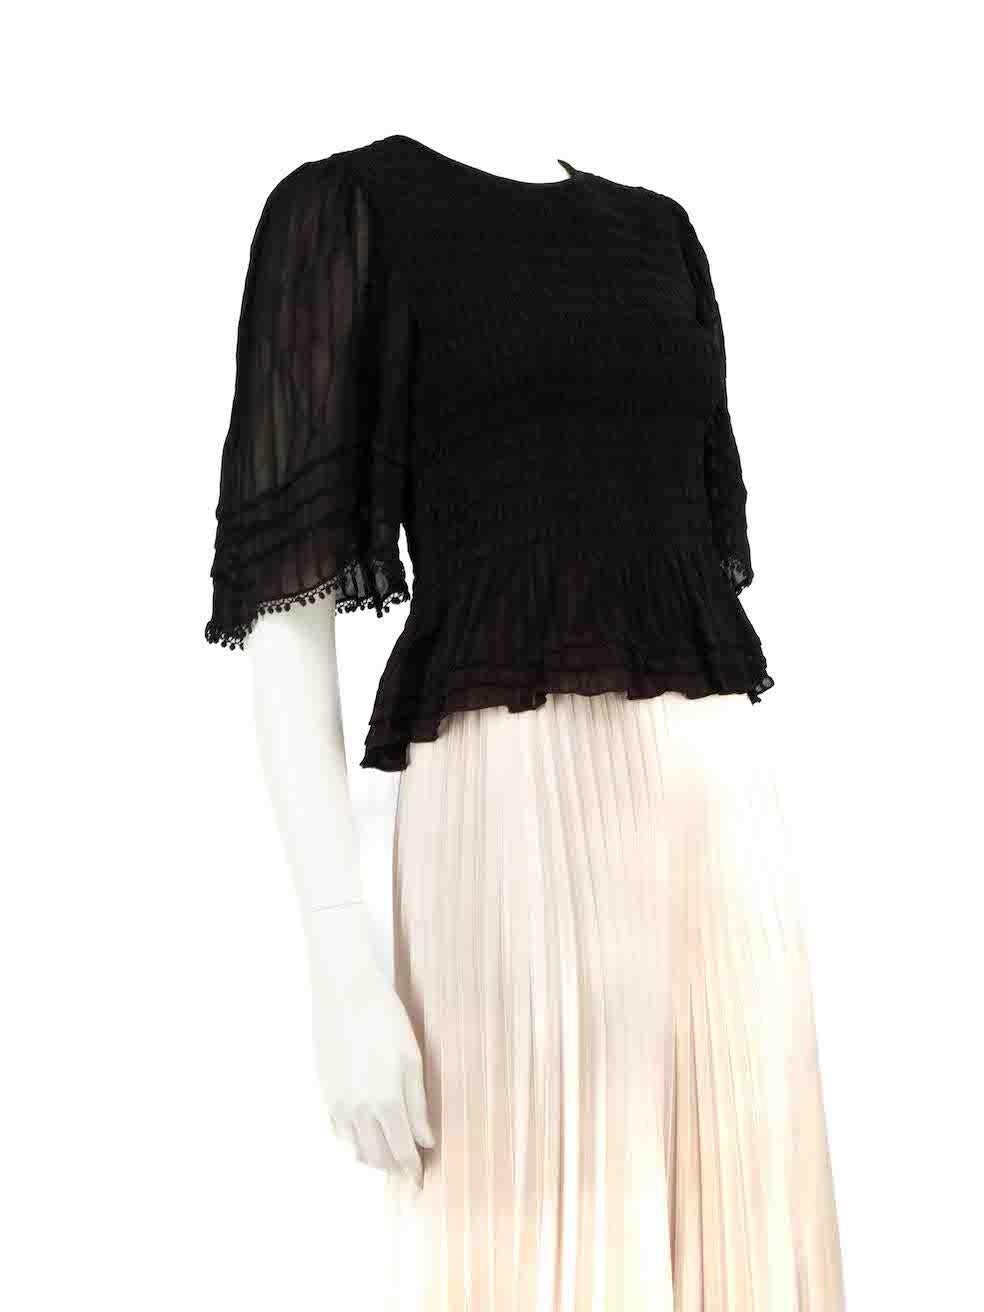 CONDITION is Very good. Hardly any wear to top is evident on this used Isabel Marant Etoile designer resale item.
 
 
 
 Details
 
 
 Black
 
 Viscose
 
 Mid sleeves top
 
 Ruched accent
 
 Round neckline
 
 Elasticated and stretchy
 
 Back keyhole